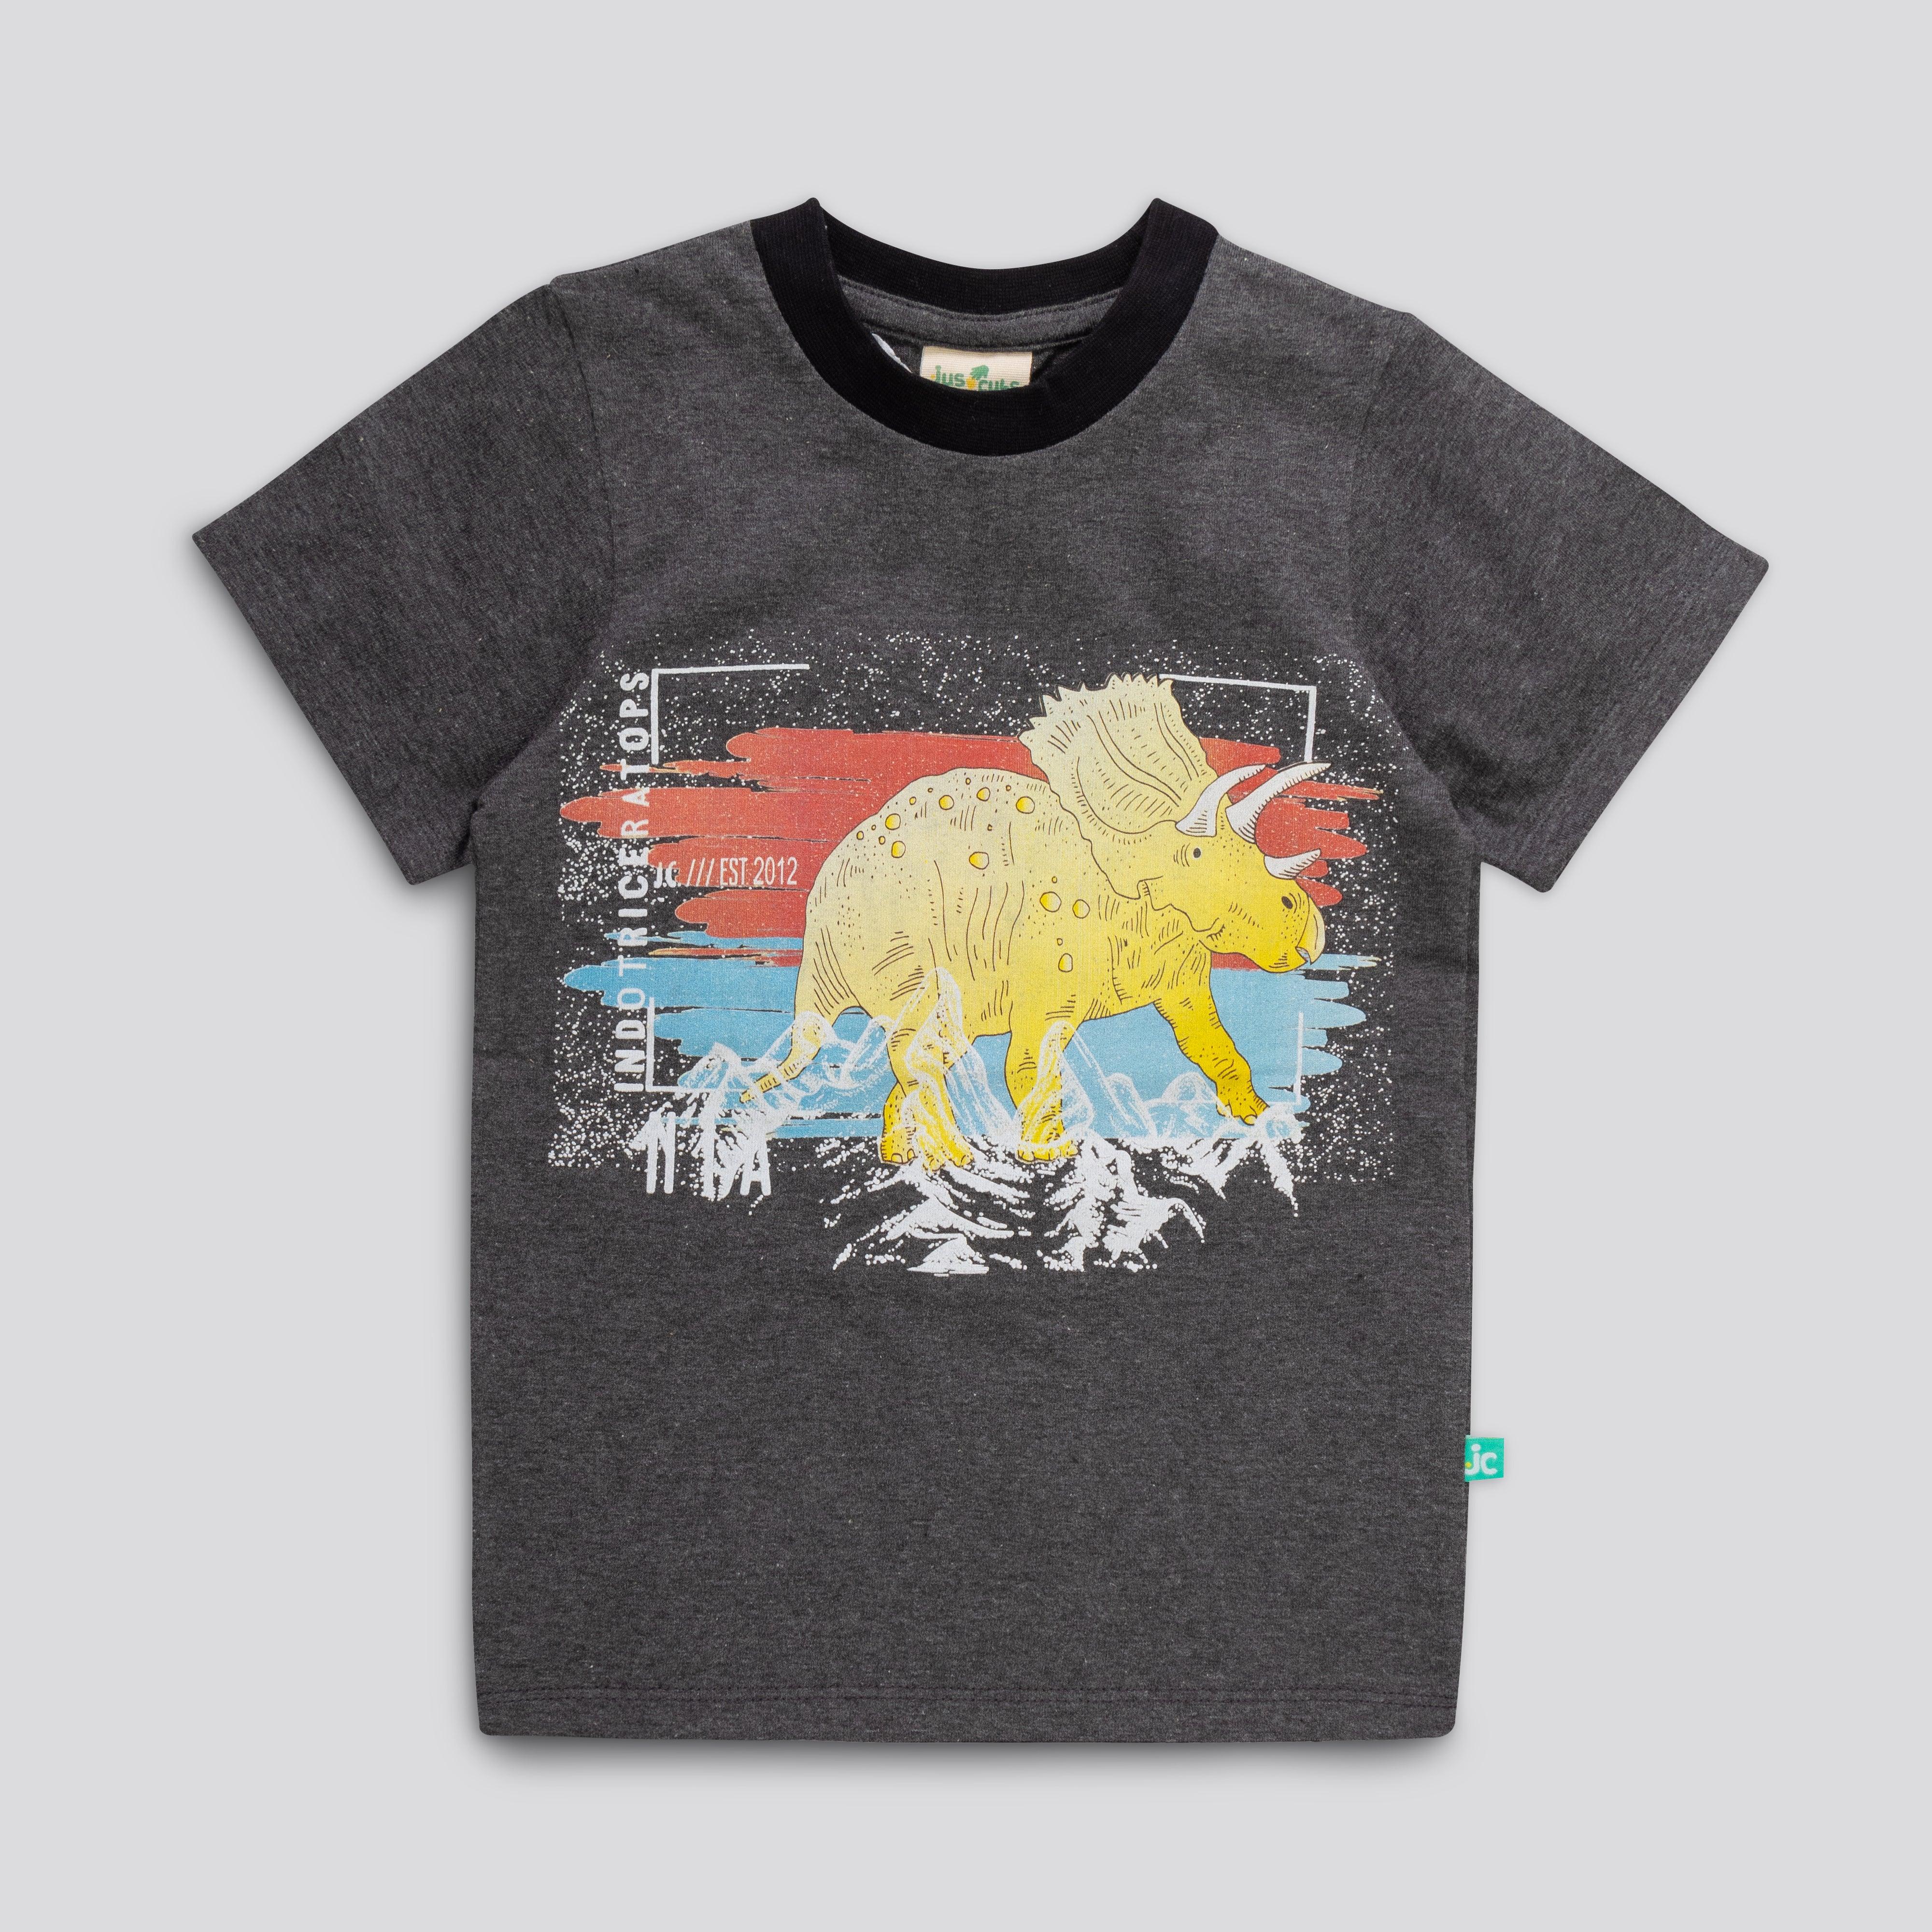 YOUNG BOYS RINO GRAPHIC PRINTED T SHIRT - Juscubs